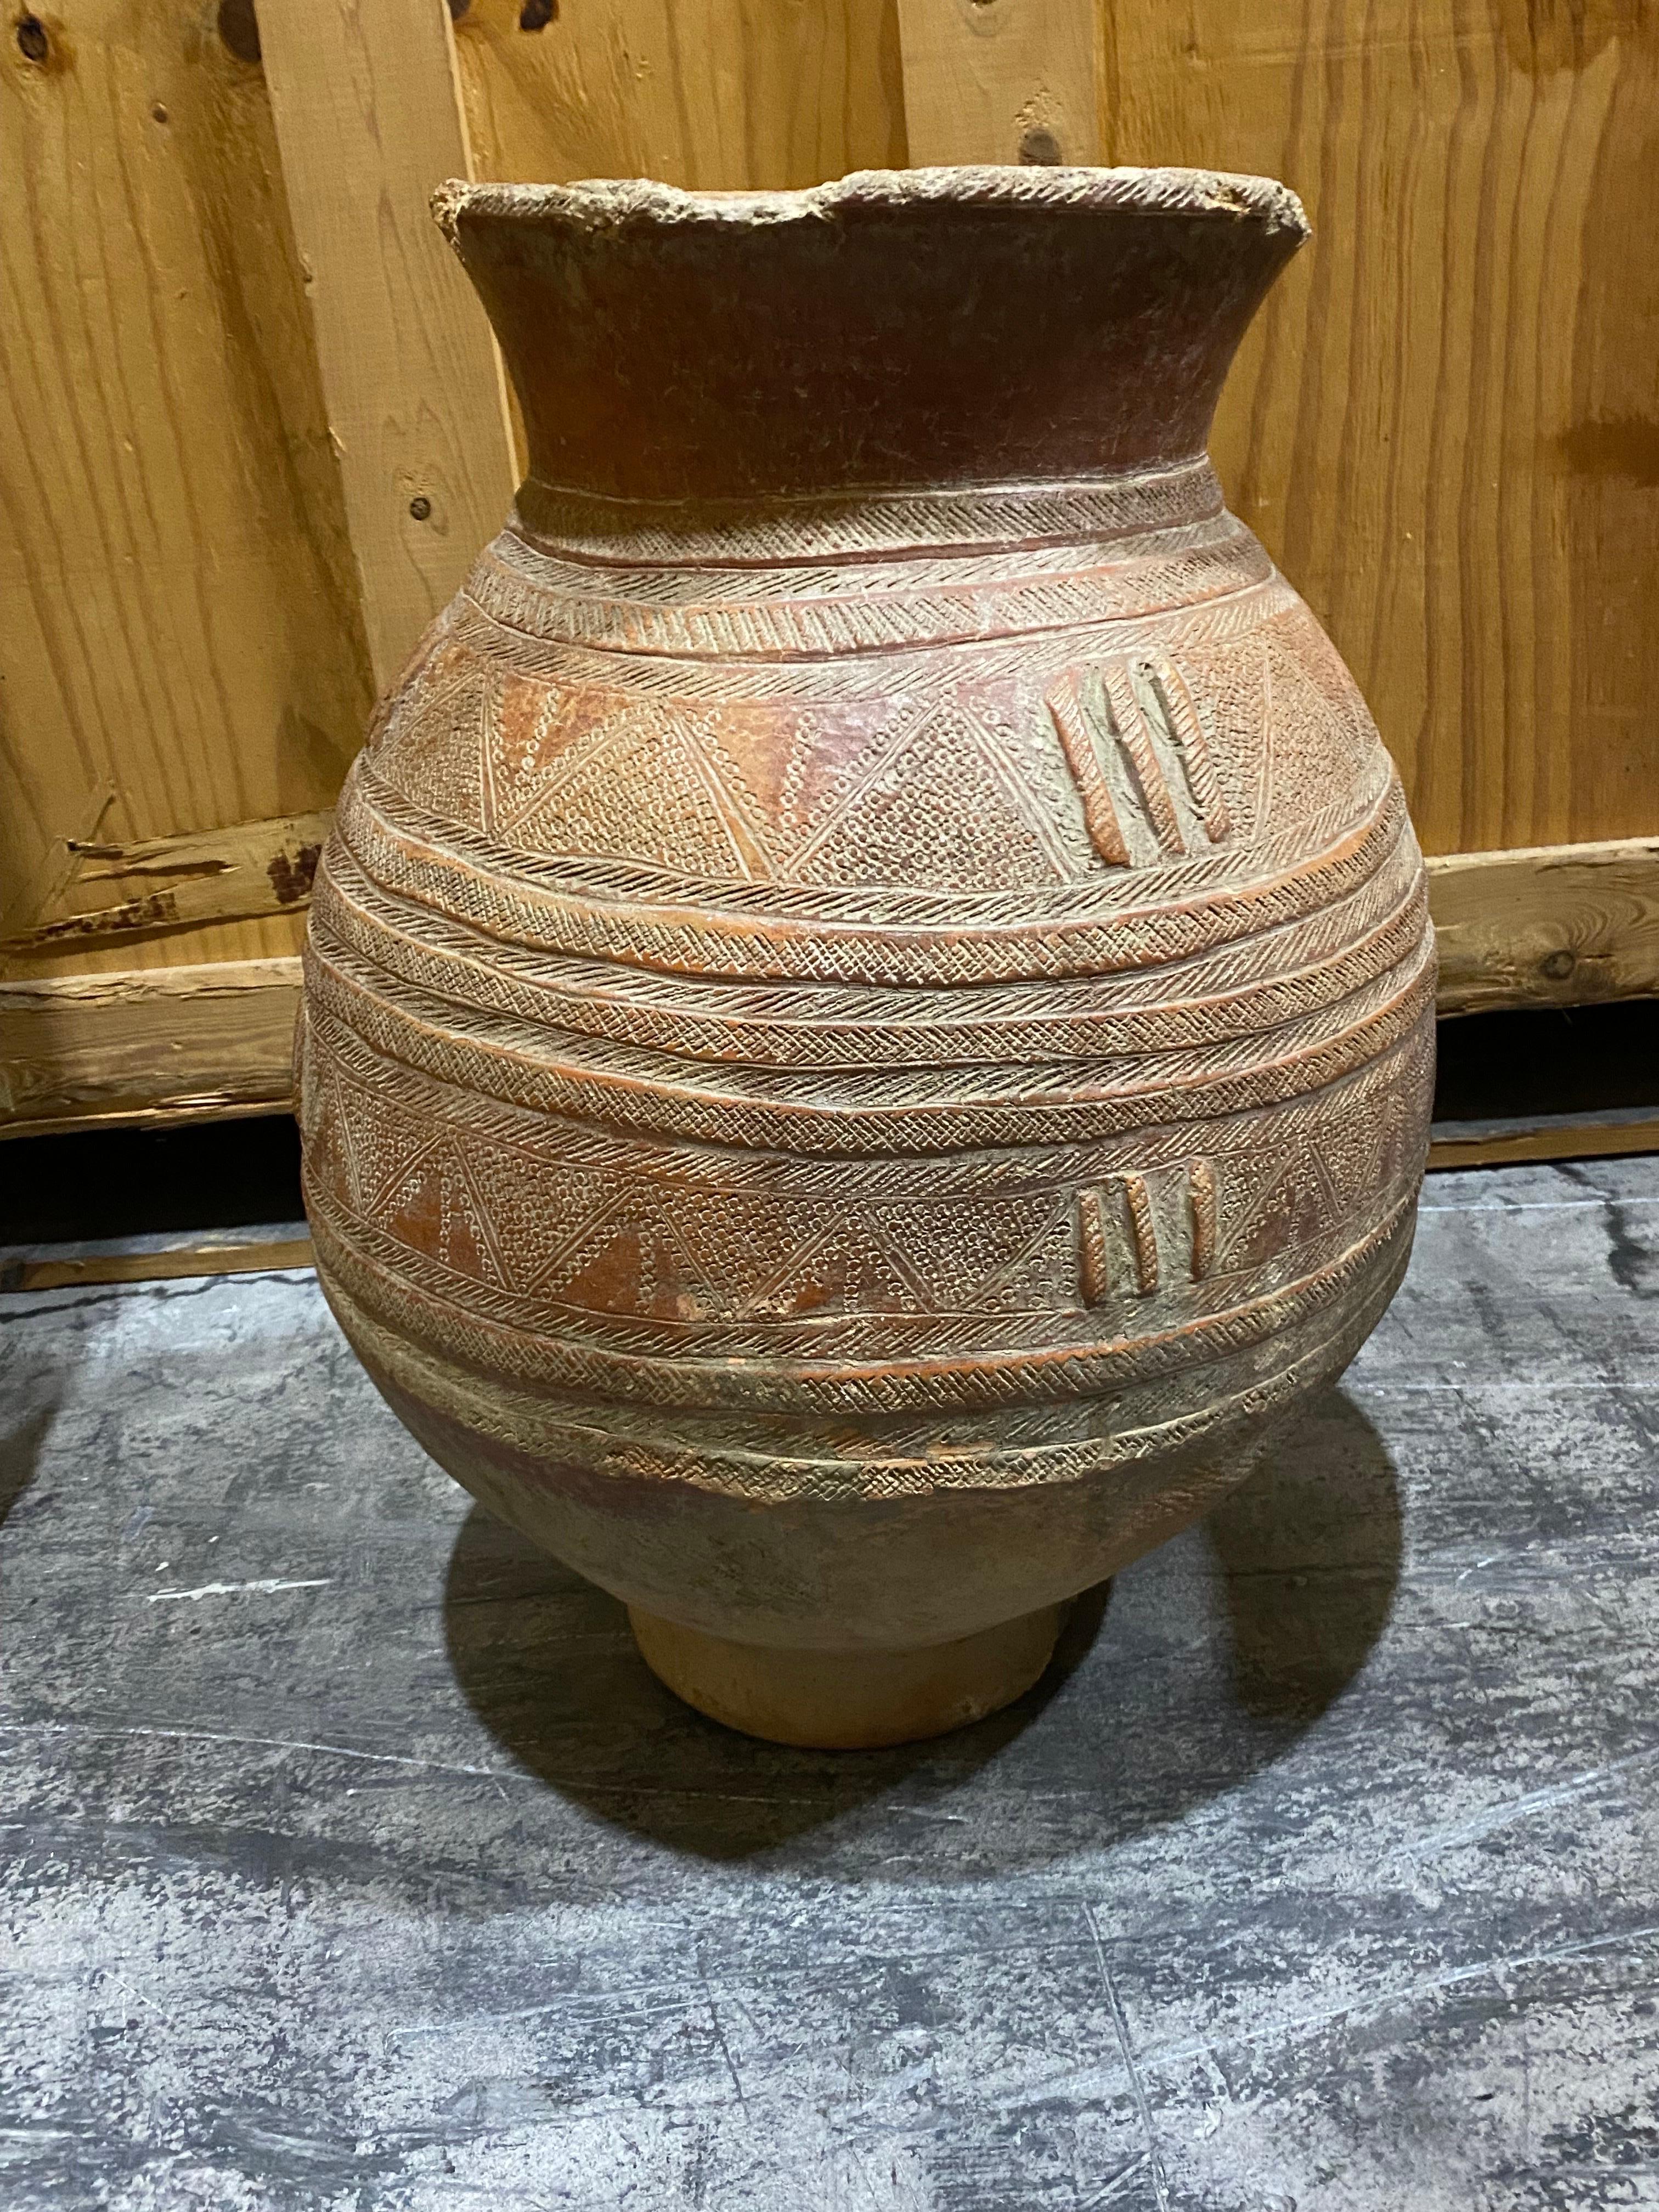 18th C. Terracotta Jar with elaborate incised design in a worn reddish finish. 
Potentially much older, the design consists of hand molded lines running horizontally with cross hatch design incised between a repeating motif of three molded vertical